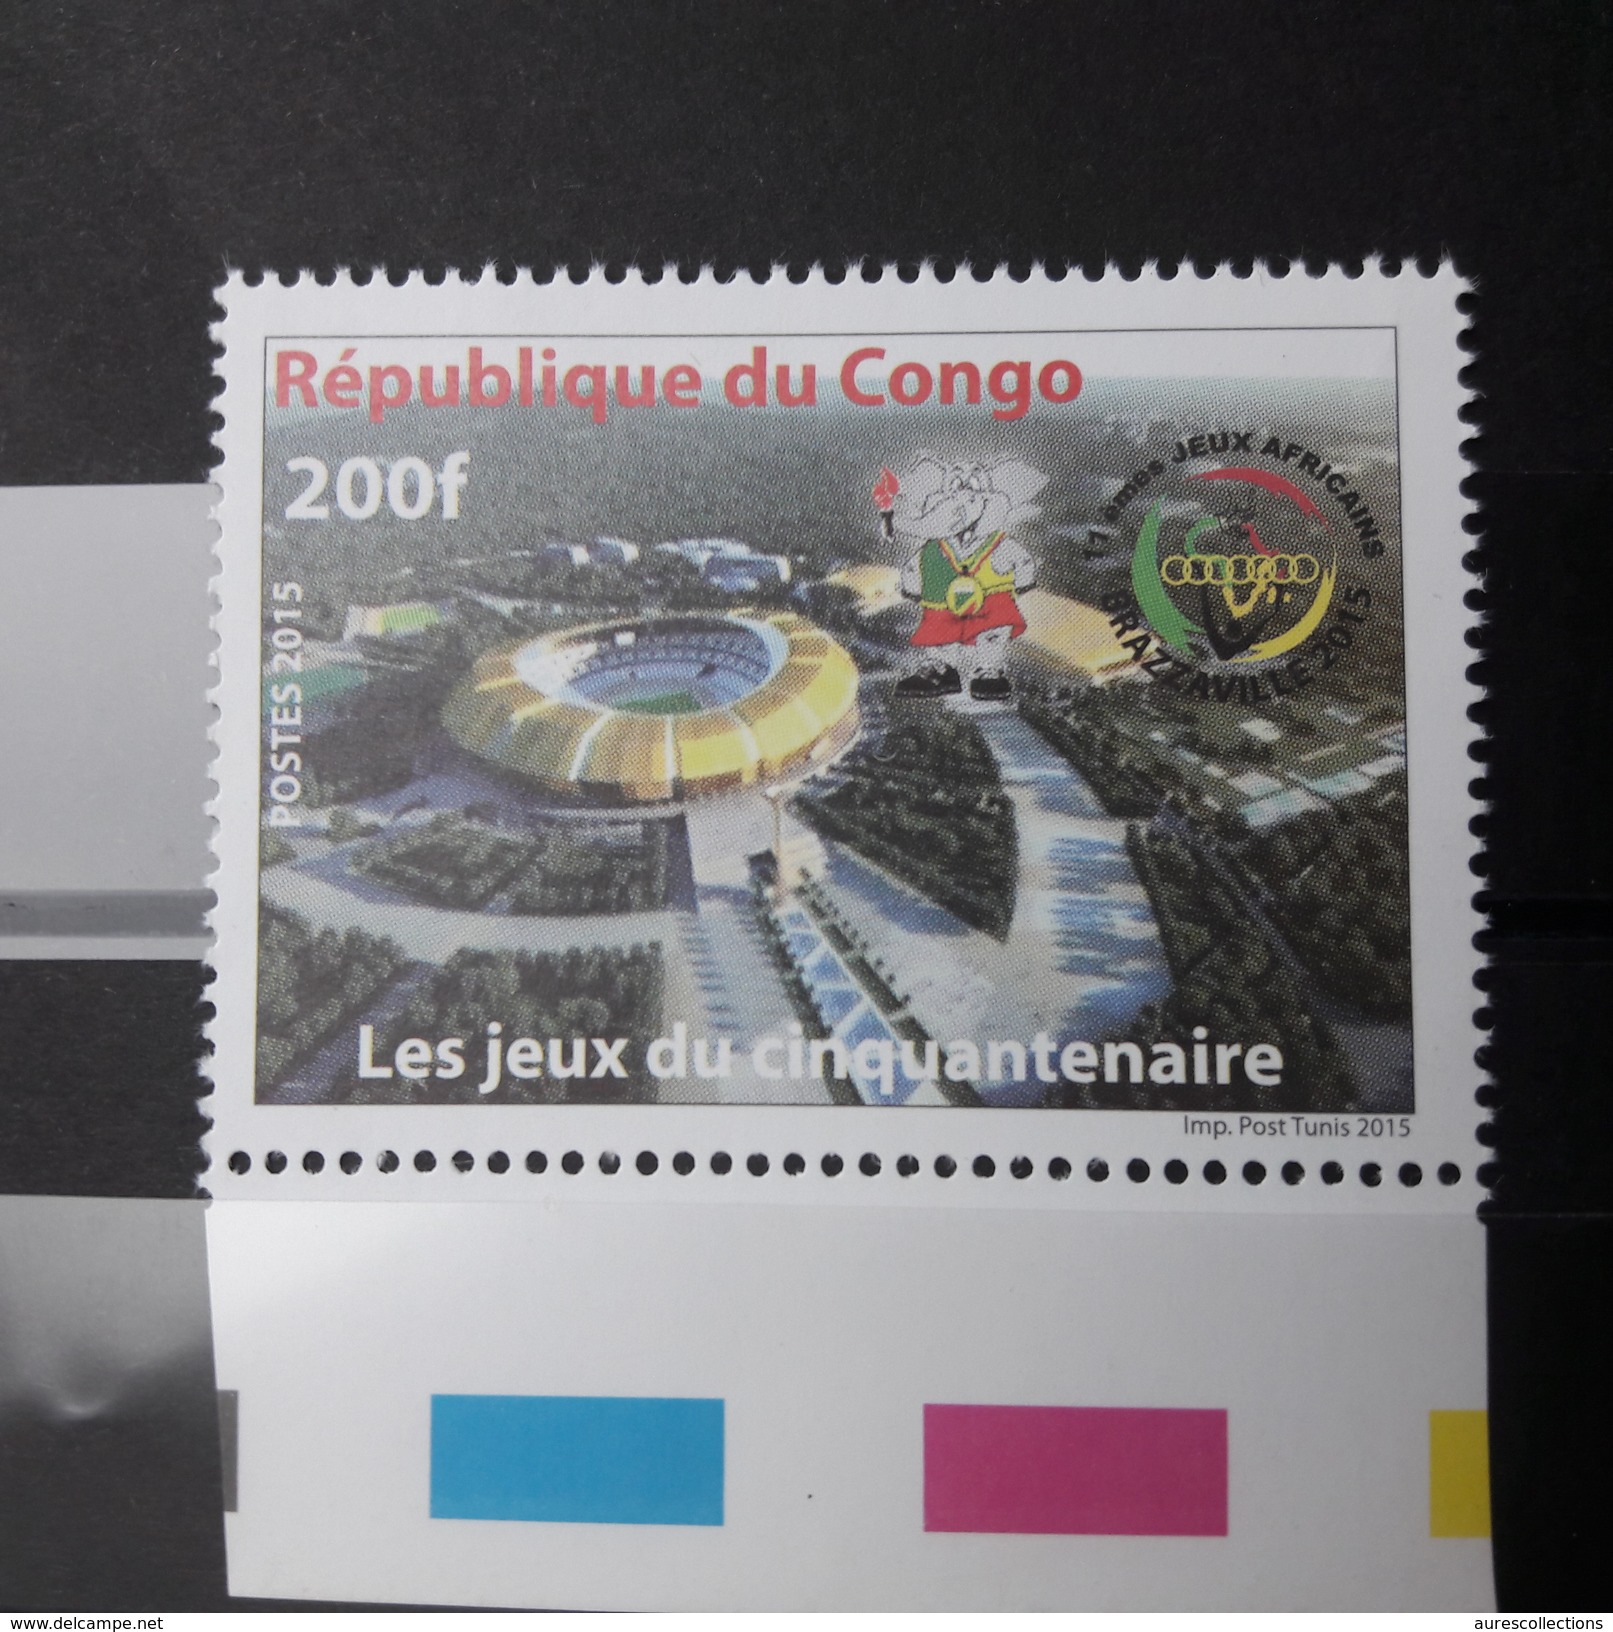 CONGO CHINA 2015 JEUX AFRICAINS DU CINQUANTENAIRE ALL AFRICA GAMES PANAFRICAN STADIUM SOCCER FOOTBALL - RARE - MNH ** - Neufs